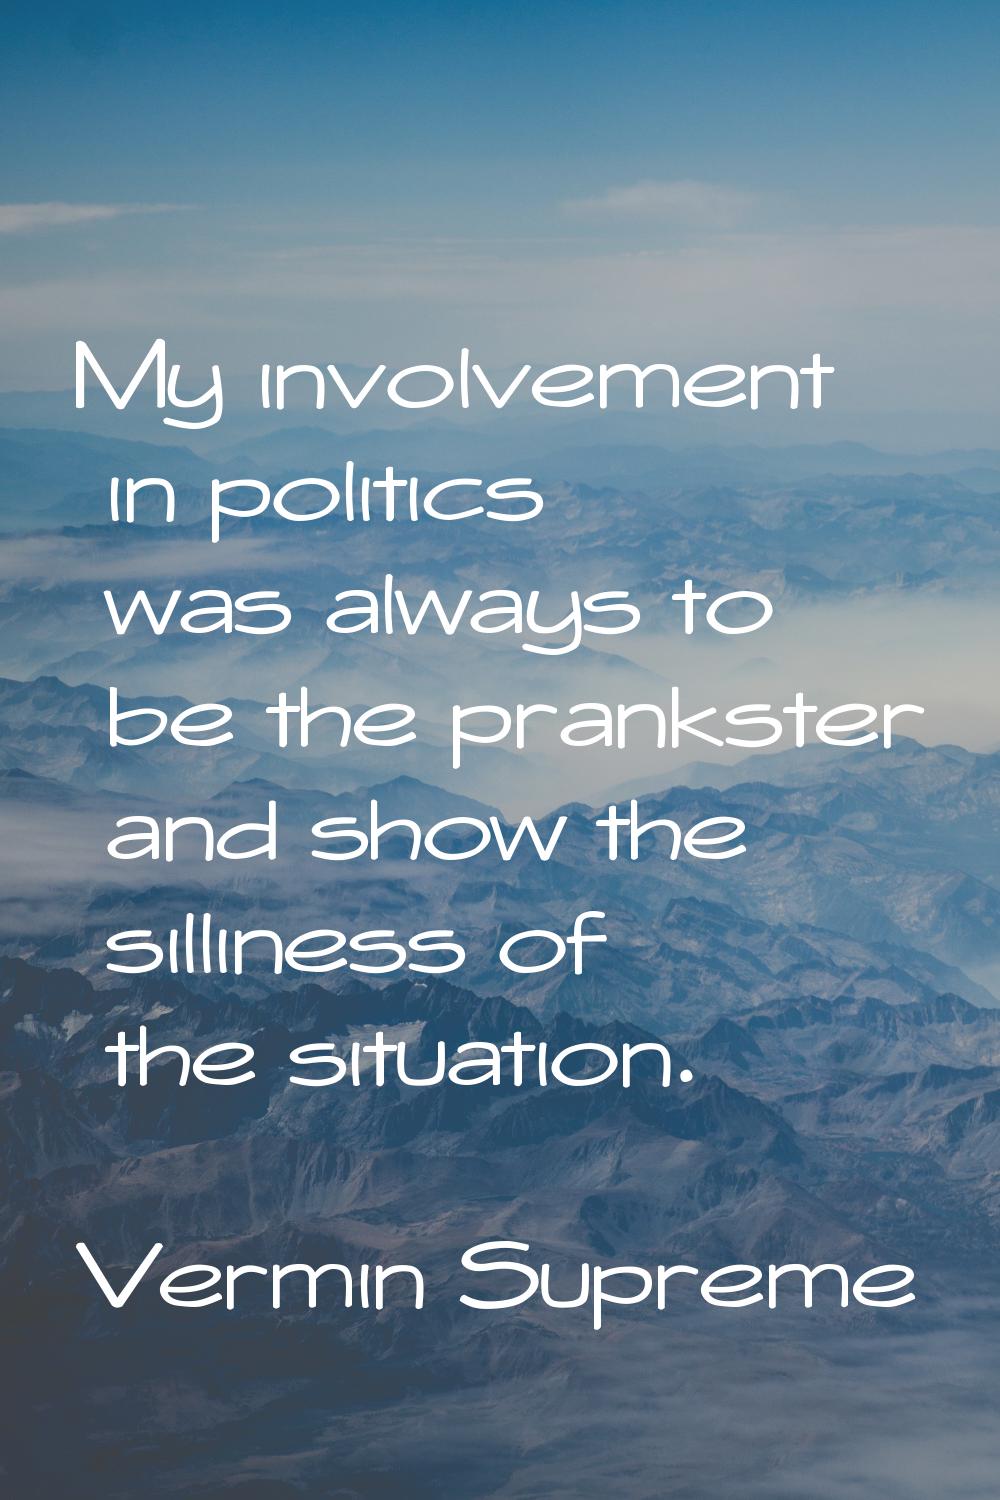 My involvement in politics was always to be the prankster and show the silliness of the situation.